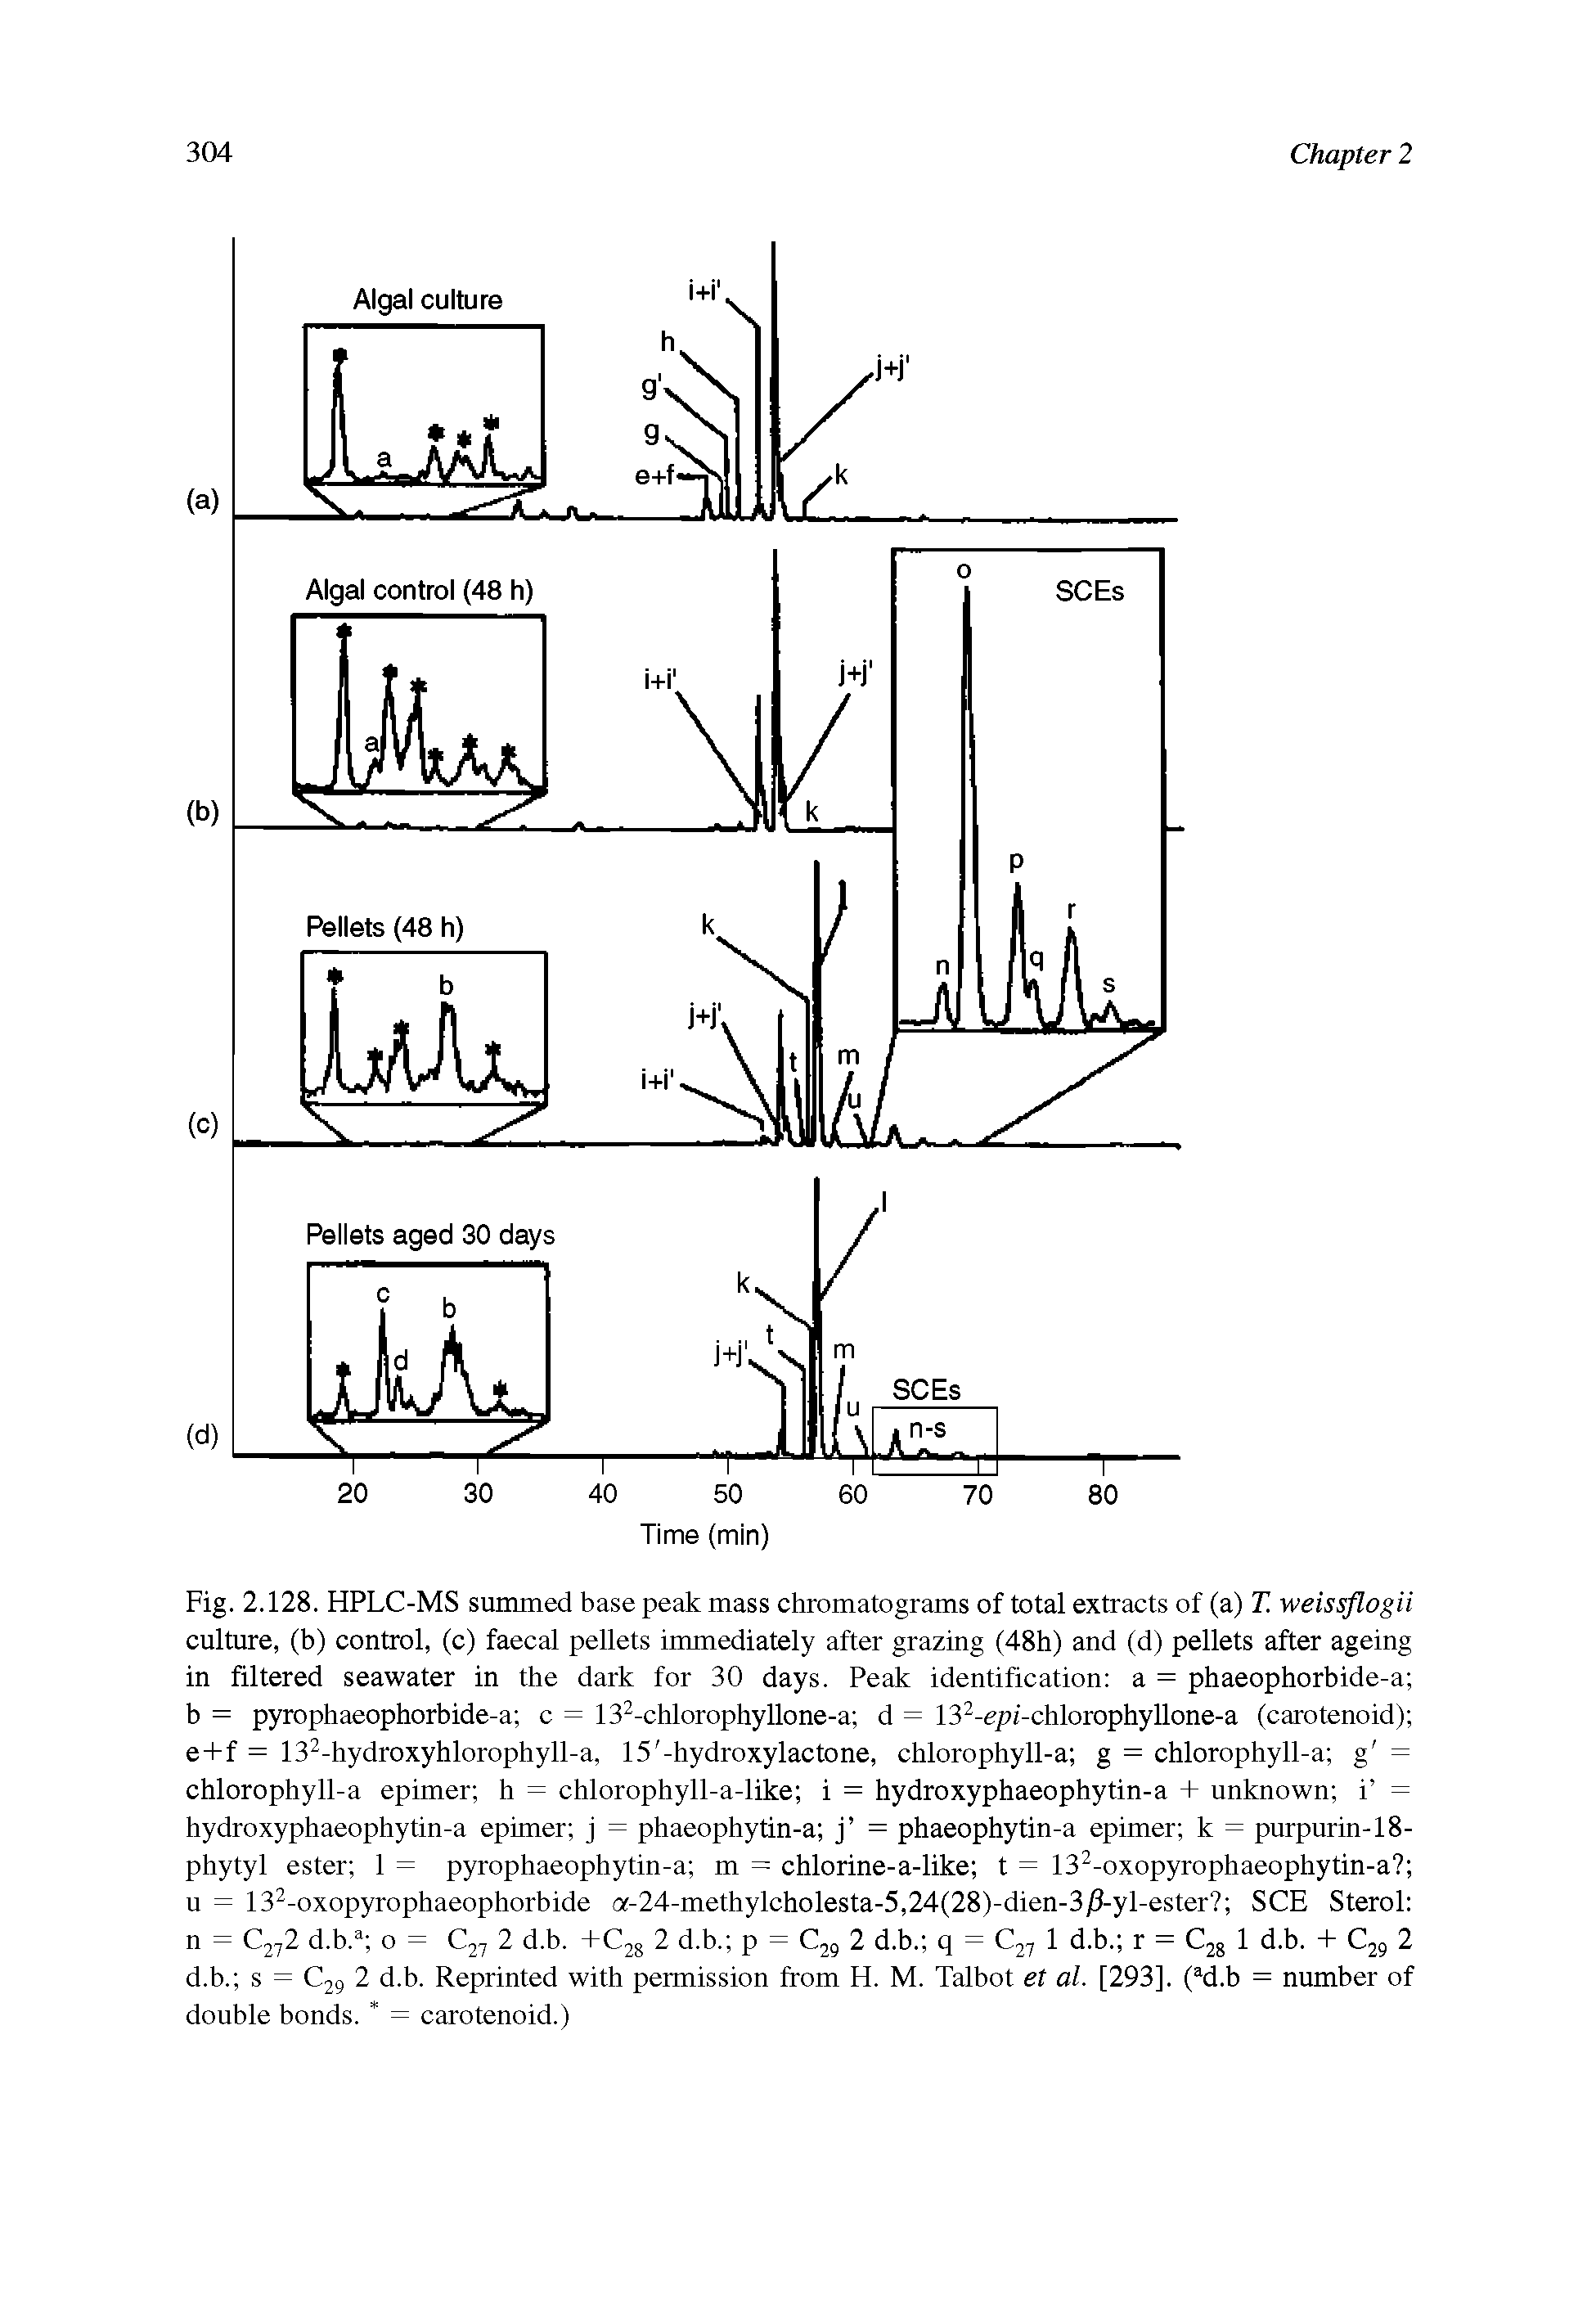 Fig. 2.128. HPLC-MS summed base peak mass chromatograms of total extracts of (a) T. weissflogii culture, (b) control, (c) faecal pellets immediately after grazing (48h) and (d) pellets after ageing in filtered seawater in the dark for 30 days. Peak identification a = phaeophorbide-a b = pyrophaeophorbide-a c = 132-chlorophyllone-a d = 132-epi-chlorophyllone-a (carotenoid) e + f = 132-hydroxyhlorophyll-a, 15 -hydroxylactone, chlorophyll-a g = chlorophyll-a g = chlorophyll-a epimer h = chlorophyll-a-like i = hydroxyphaeophytin-a + unknown i = hydroxyphaeophytin-a epimer j = phaeophytin-a j = phaeophytin-a epimer k = purpurin-18-phytyl ester 1 = pyrophaeophytin-a m = chlorine-a-like t = 132-oxopyrophaeophytin-a u = 132-oxopyrophaeophorbide a-24-methylcholesta-5,24(28)-dien-3/ -yl-ester SCE Sterol n = C272 d.b.a o = C27 2 d.b. +C28 2 d.b. p = C29 2 d.b. q = C27 1 d.b. r = C28 1 d.b. + C29 2 d.b. s = C29 2 d.b. Reprinted with permission from H. M. Talbot et al. [293], (ad.b = number of double bonds. = carotenoid.)...